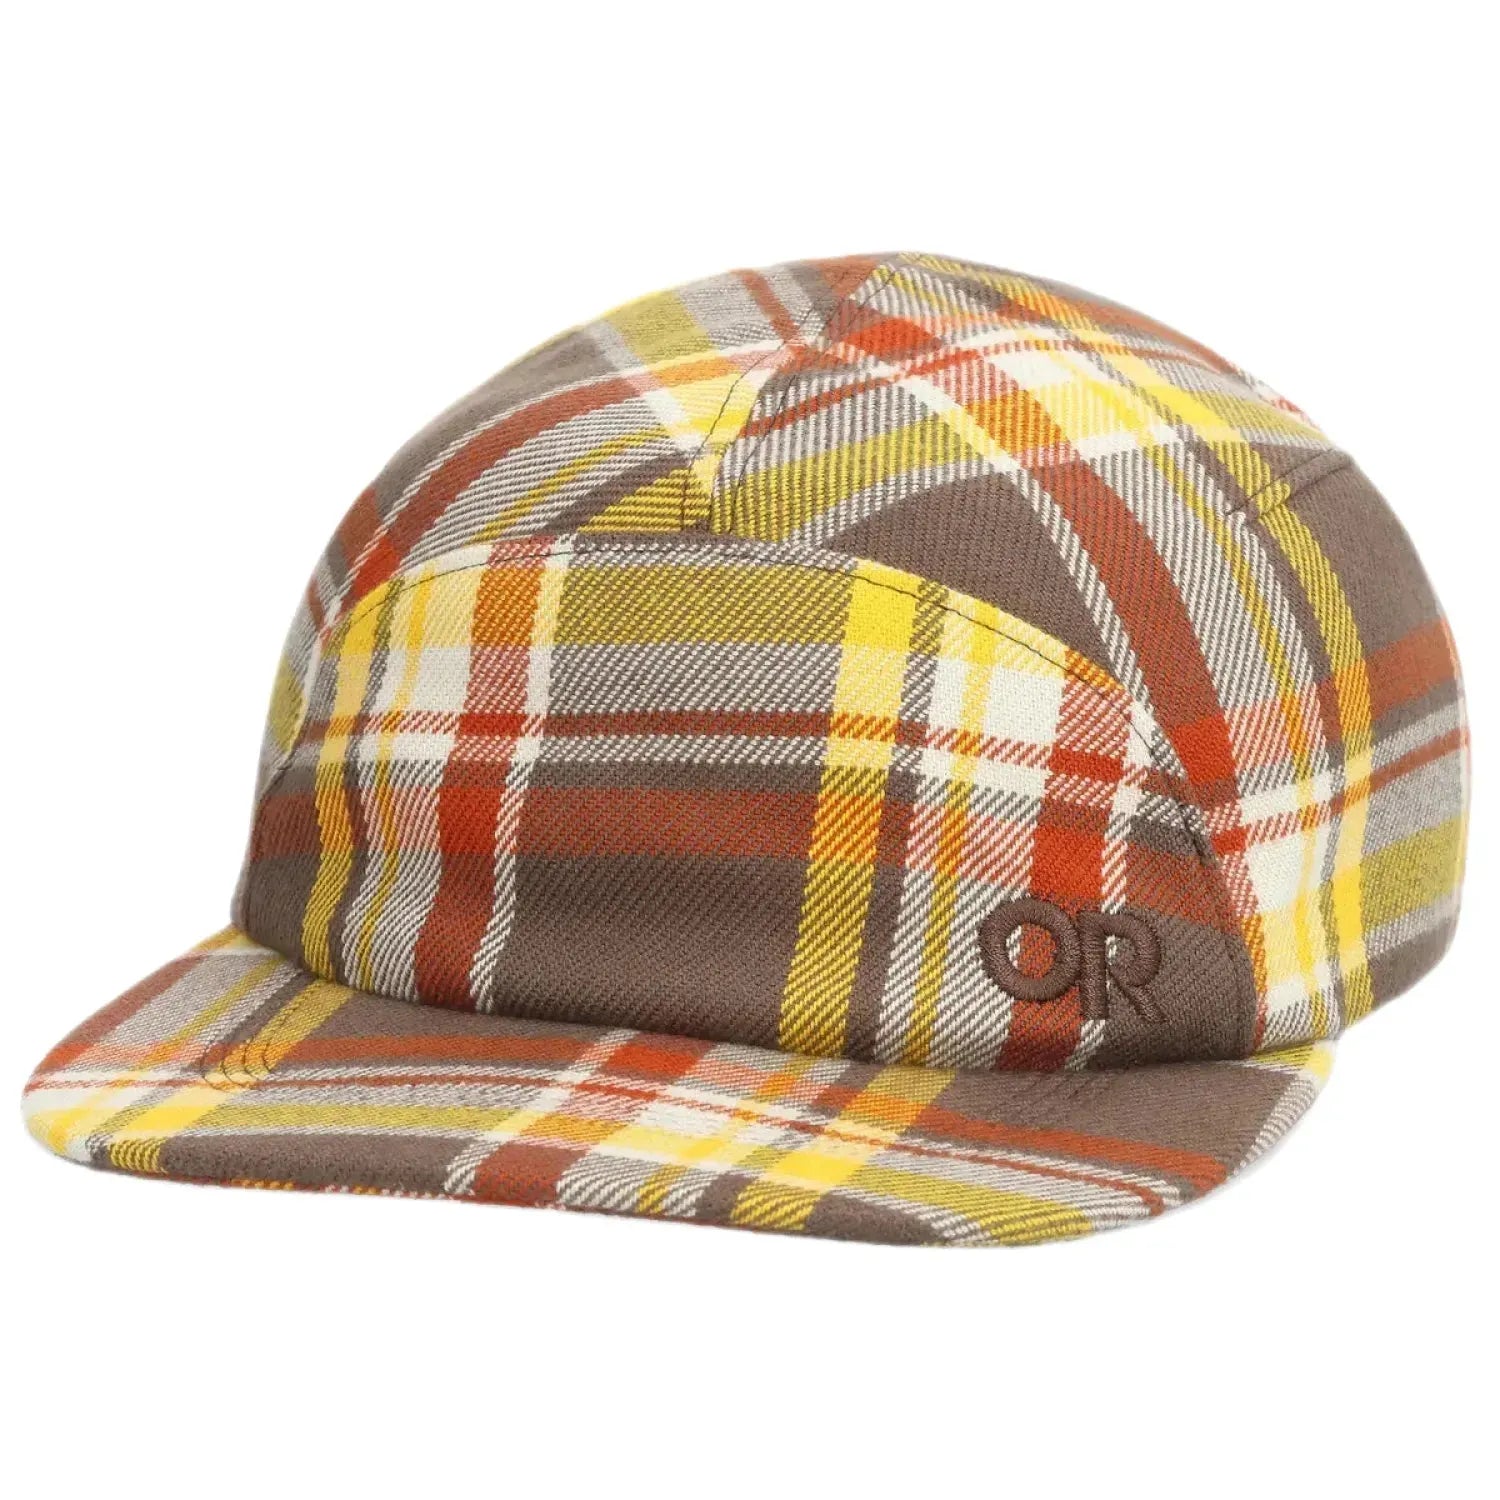 Outdoor Research Feedback Flannel Cap shown in Hickory, front view.